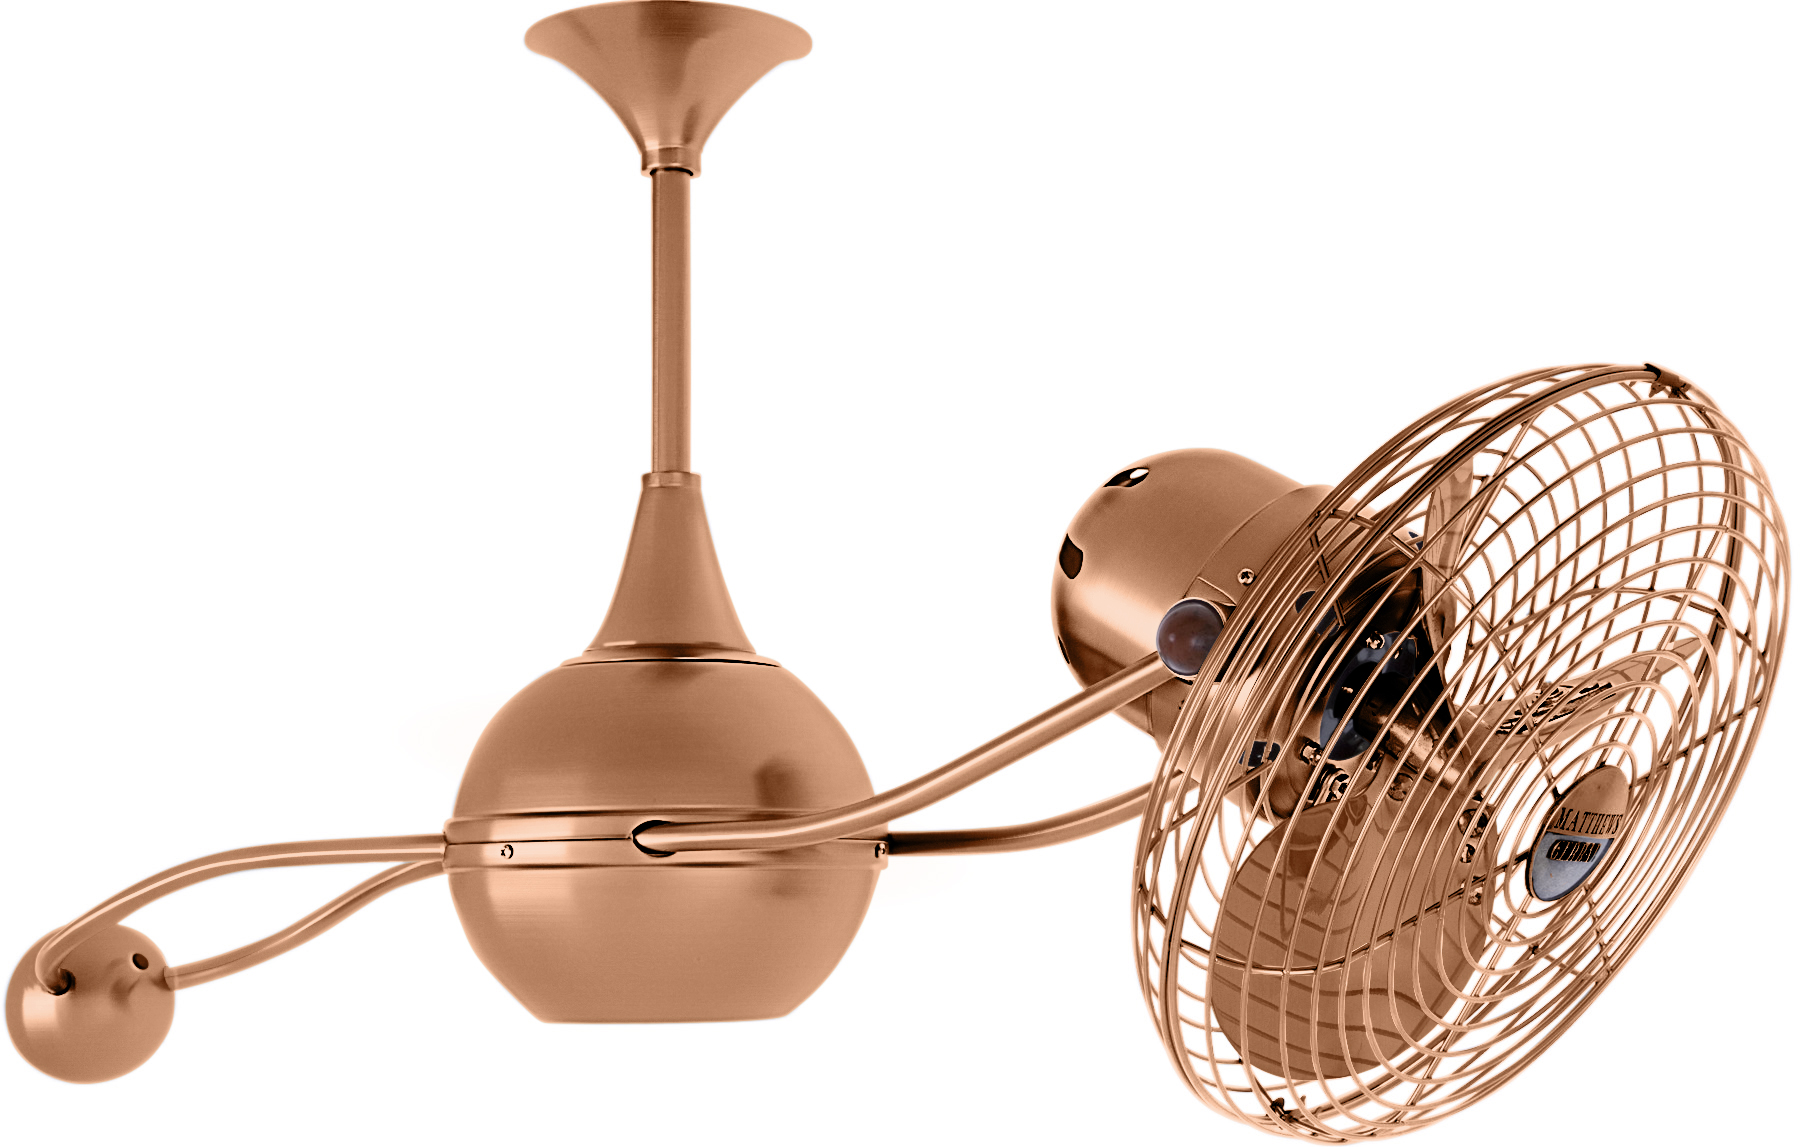 Brisa 2000 ceiling fan in Brushed Copper finish with Metal Blades in Safety Cage made by Matthews Fan Company.